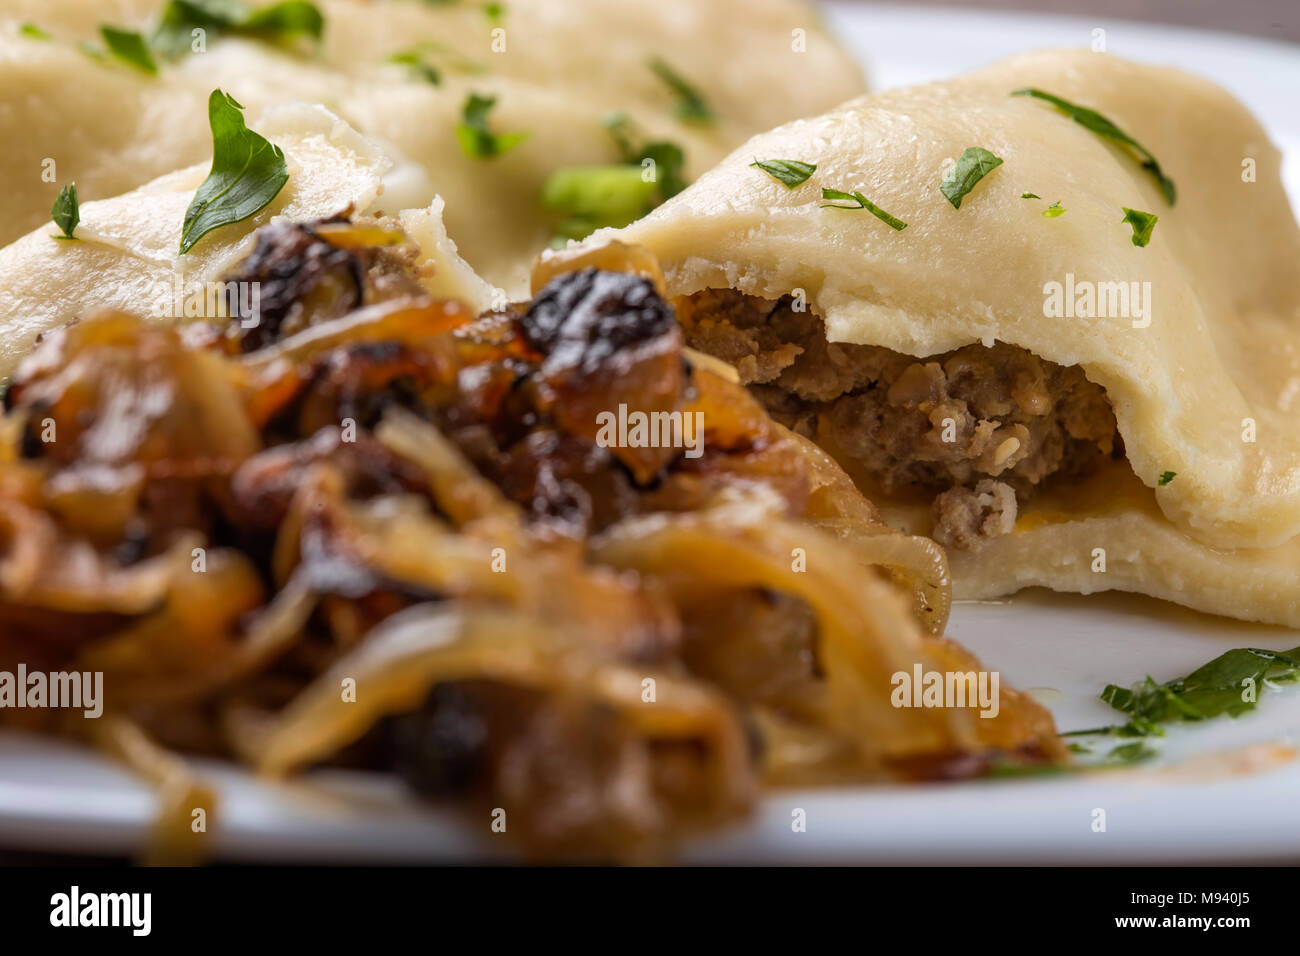 Pierogi, pyrohy or dumplings, filled with beef meat served with fried onion on plate Stock Photo